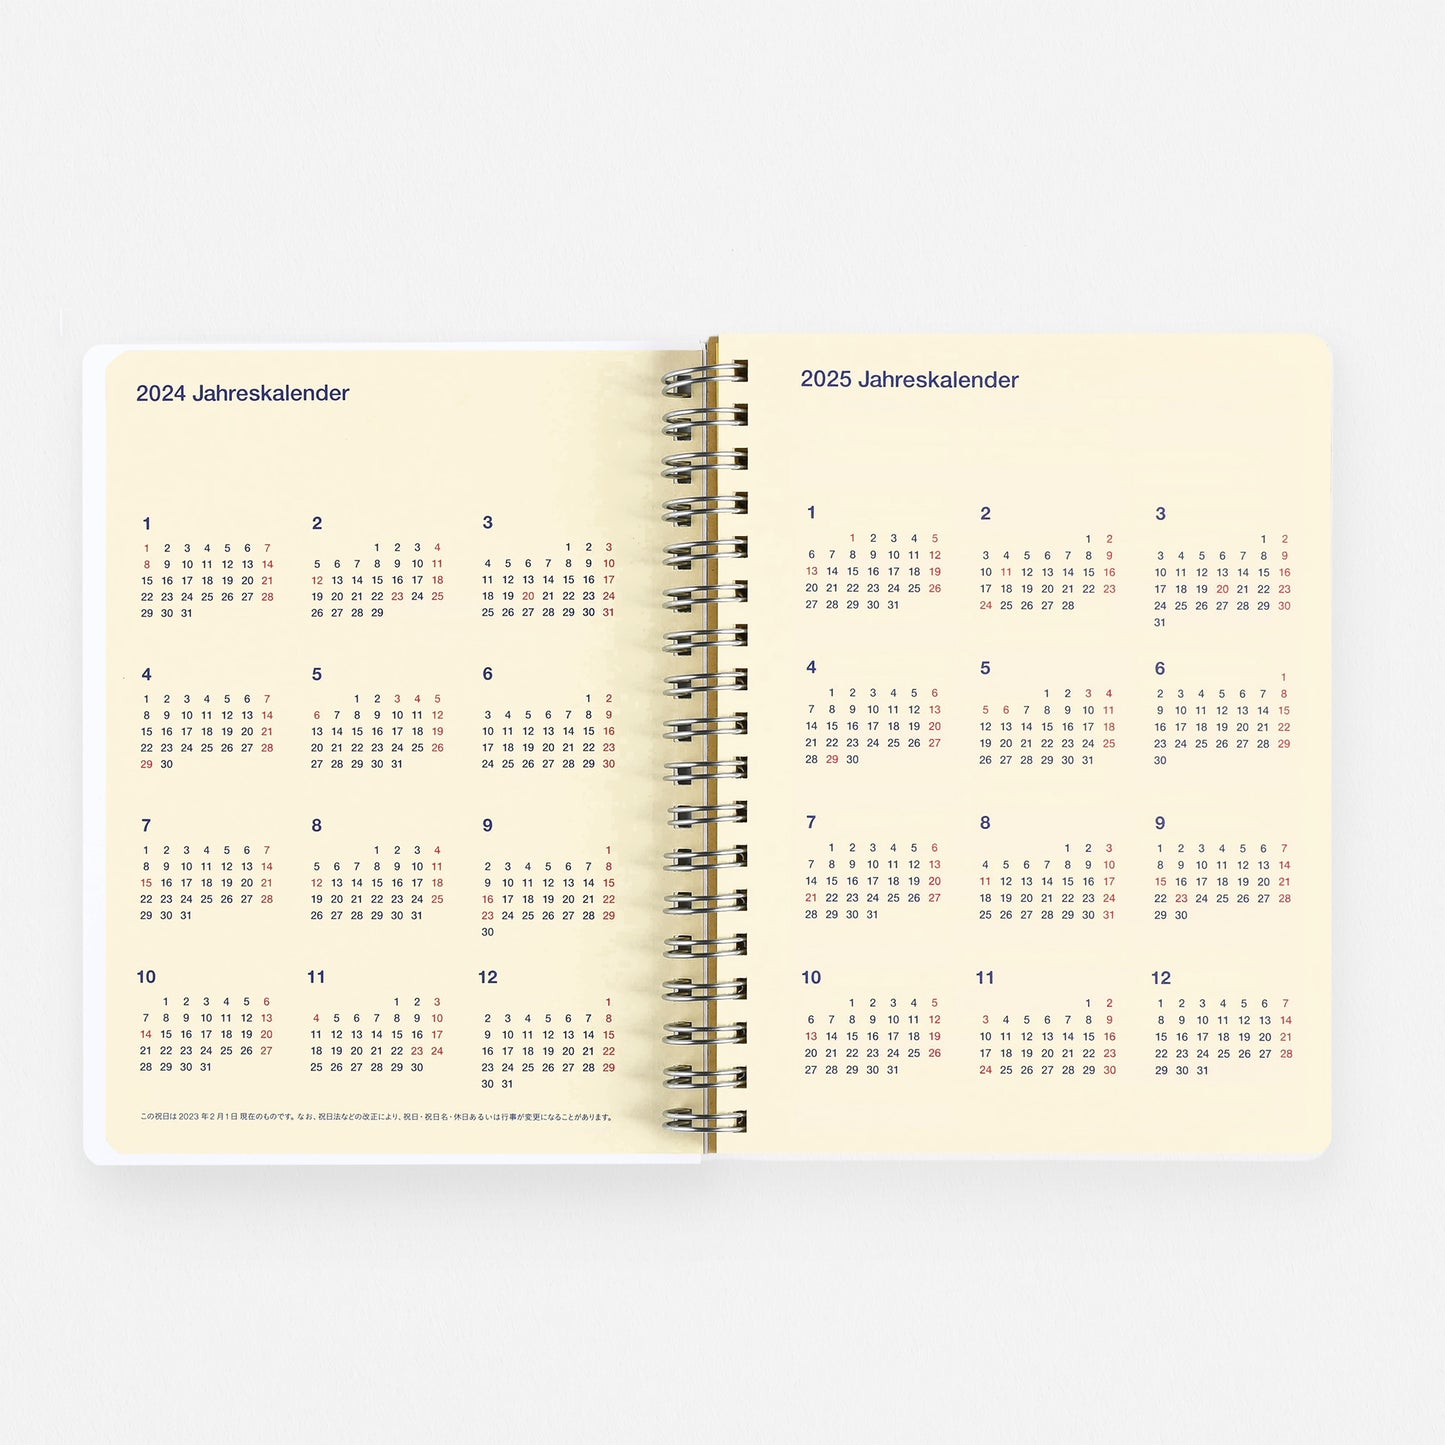 Delfonics Rollbahn 2024 Monthly Planner Latte Light Green | Large Or A5 